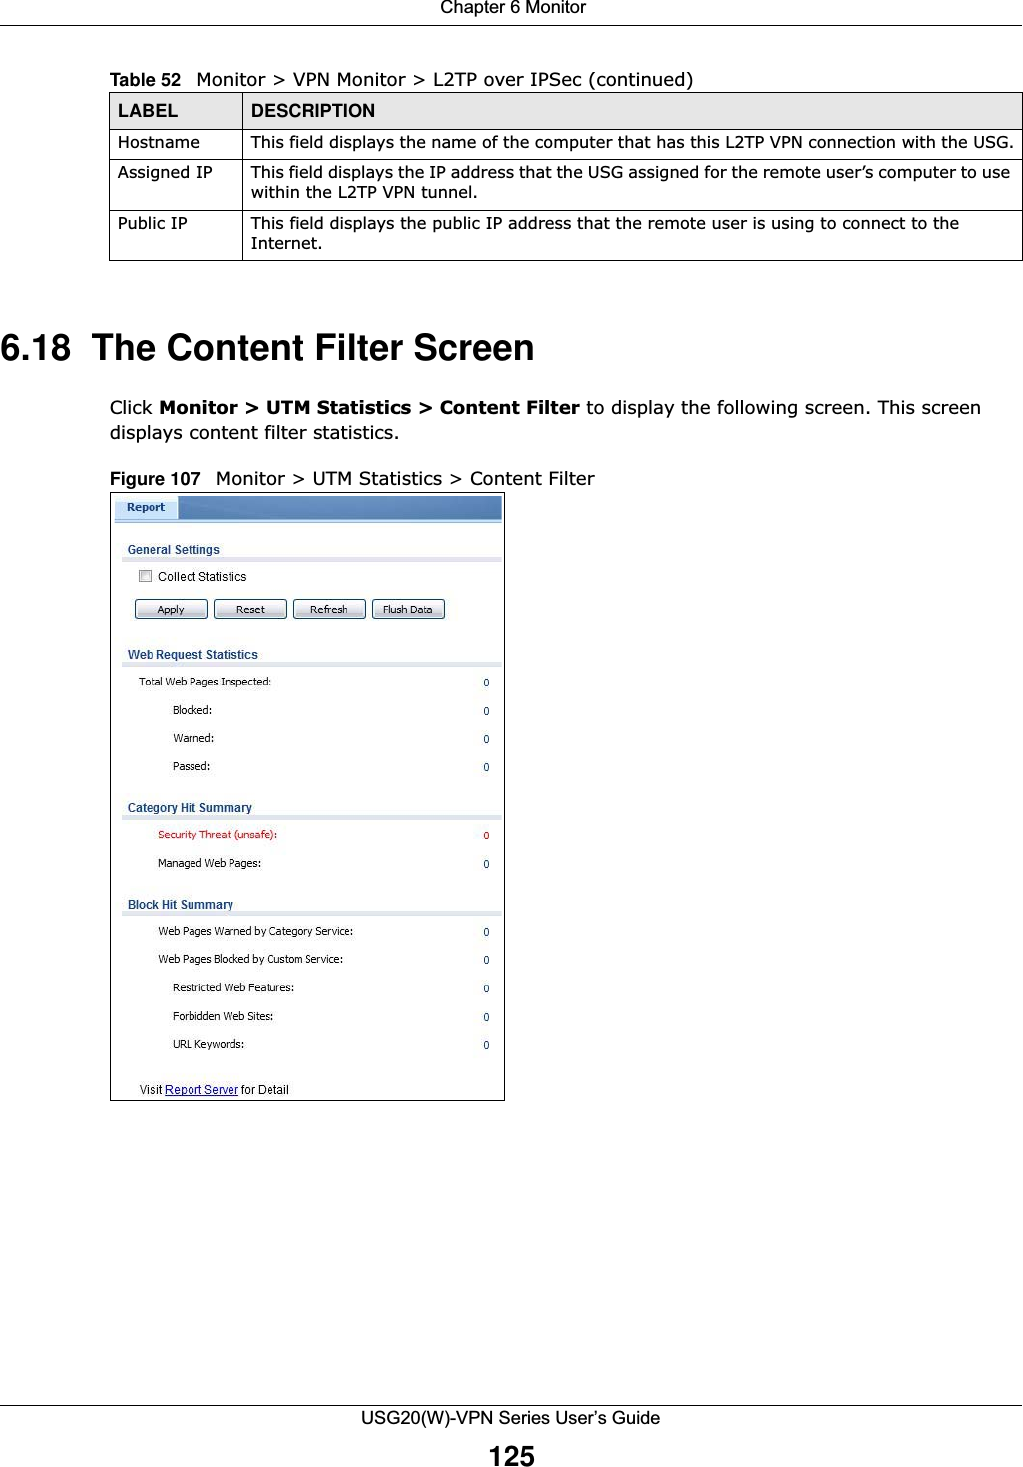  Chapter 6 MonitorUSG20(W)-VPN Series User’s Guide1256.18  The Content Filter ScreenClick Monitor &gt; UTM Statistics &gt; Content Filter to display the following screen. This screen displays content filter statistics. Figure 107   Monitor &gt; UTM Statistics &gt; Content Filter Hostname This field displays the name of the computer that has this L2TP VPN connection with the USG.Assigned IP This field displays the IP address that the USG assigned for the remote user’s computer to use within the L2TP VPN tunnel.Public IP This field displays the public IP address that the remote user is using to connect to the Internet.Table 52   Monitor &gt; VPN Monitor &gt; L2TP over IPSec (continued)LABEL DESCRIPTION